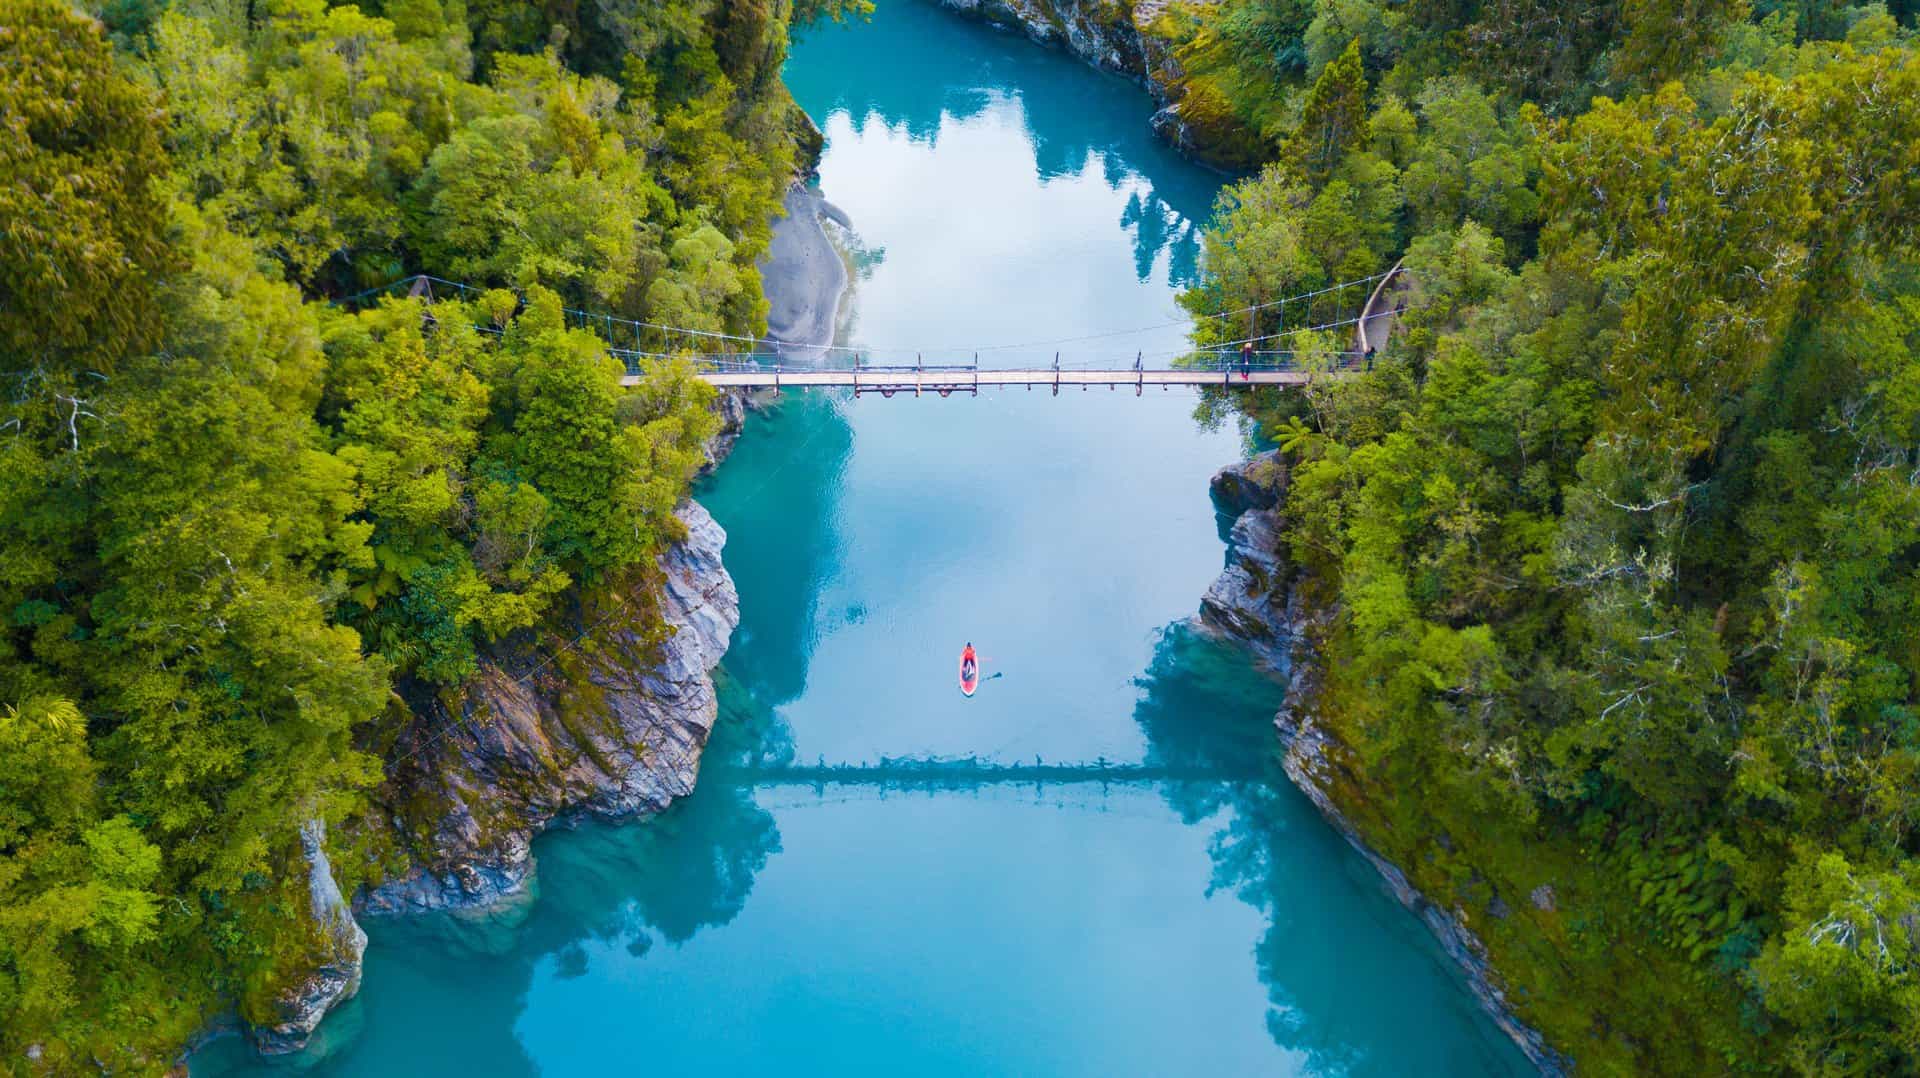 Suspension Bridge At Hokitika Gorge Vibrant Blue Turquoise Water Fringed By White Granite And Ancient Rainforest